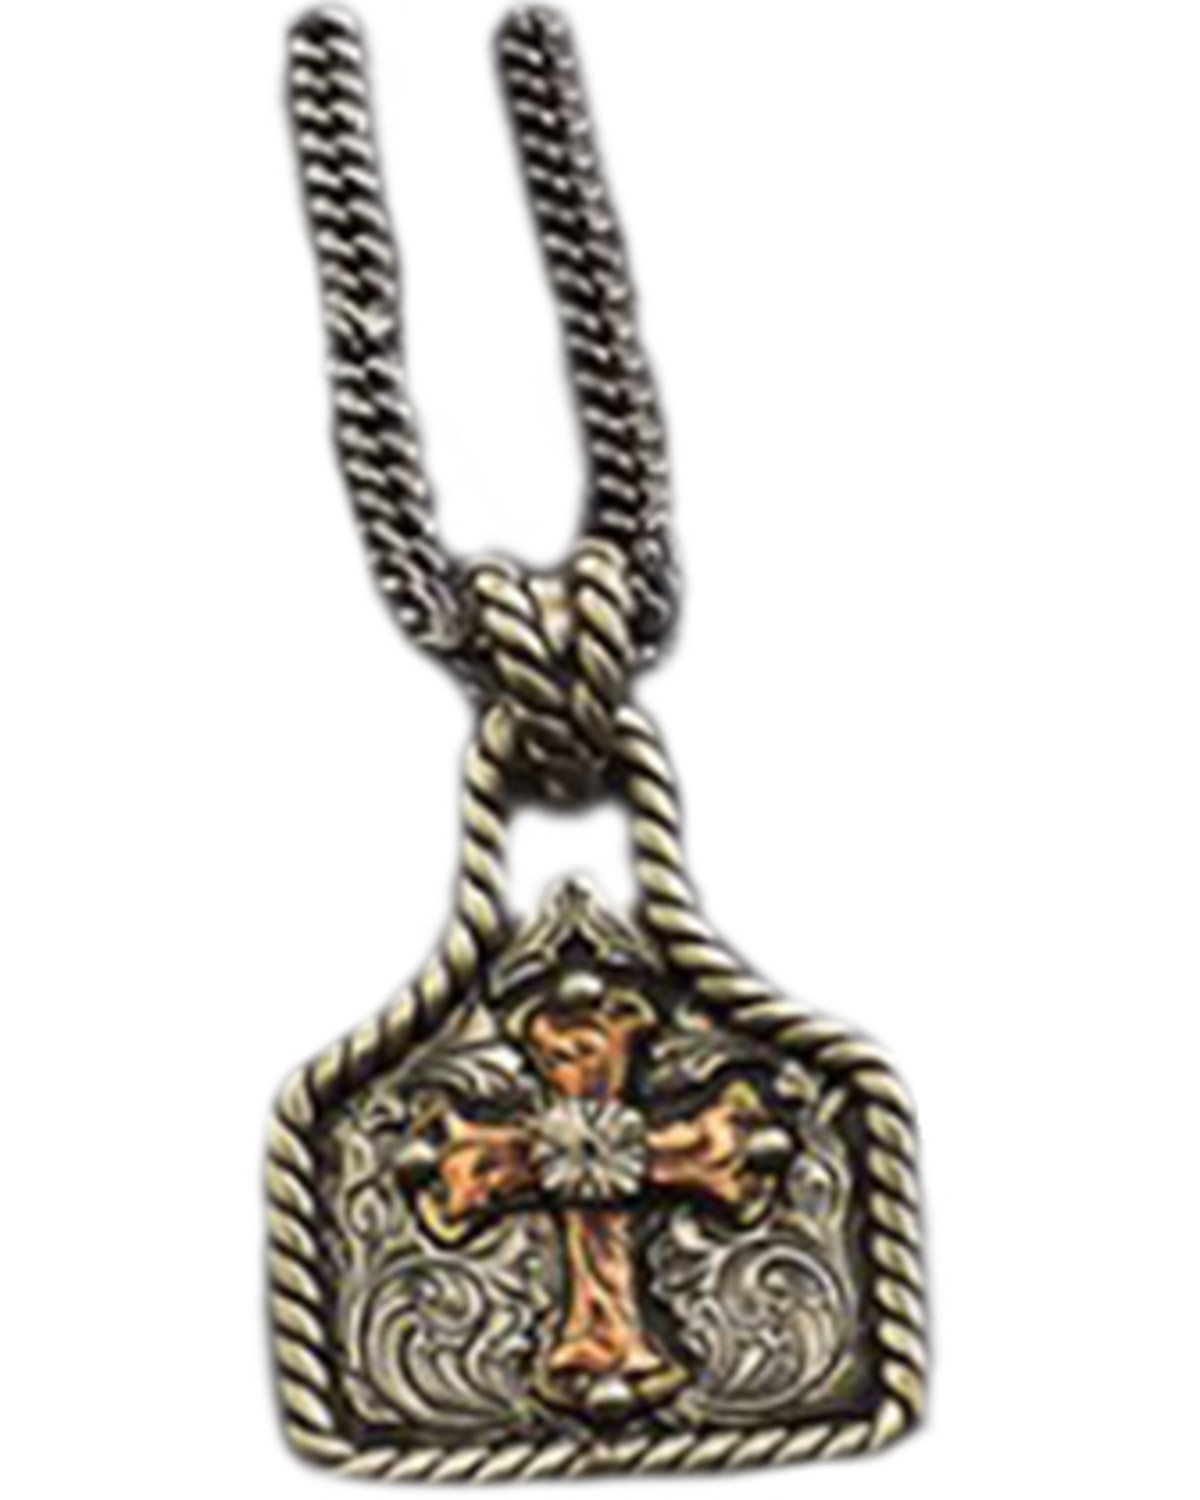 Twister Men's Cross Tag Necklace